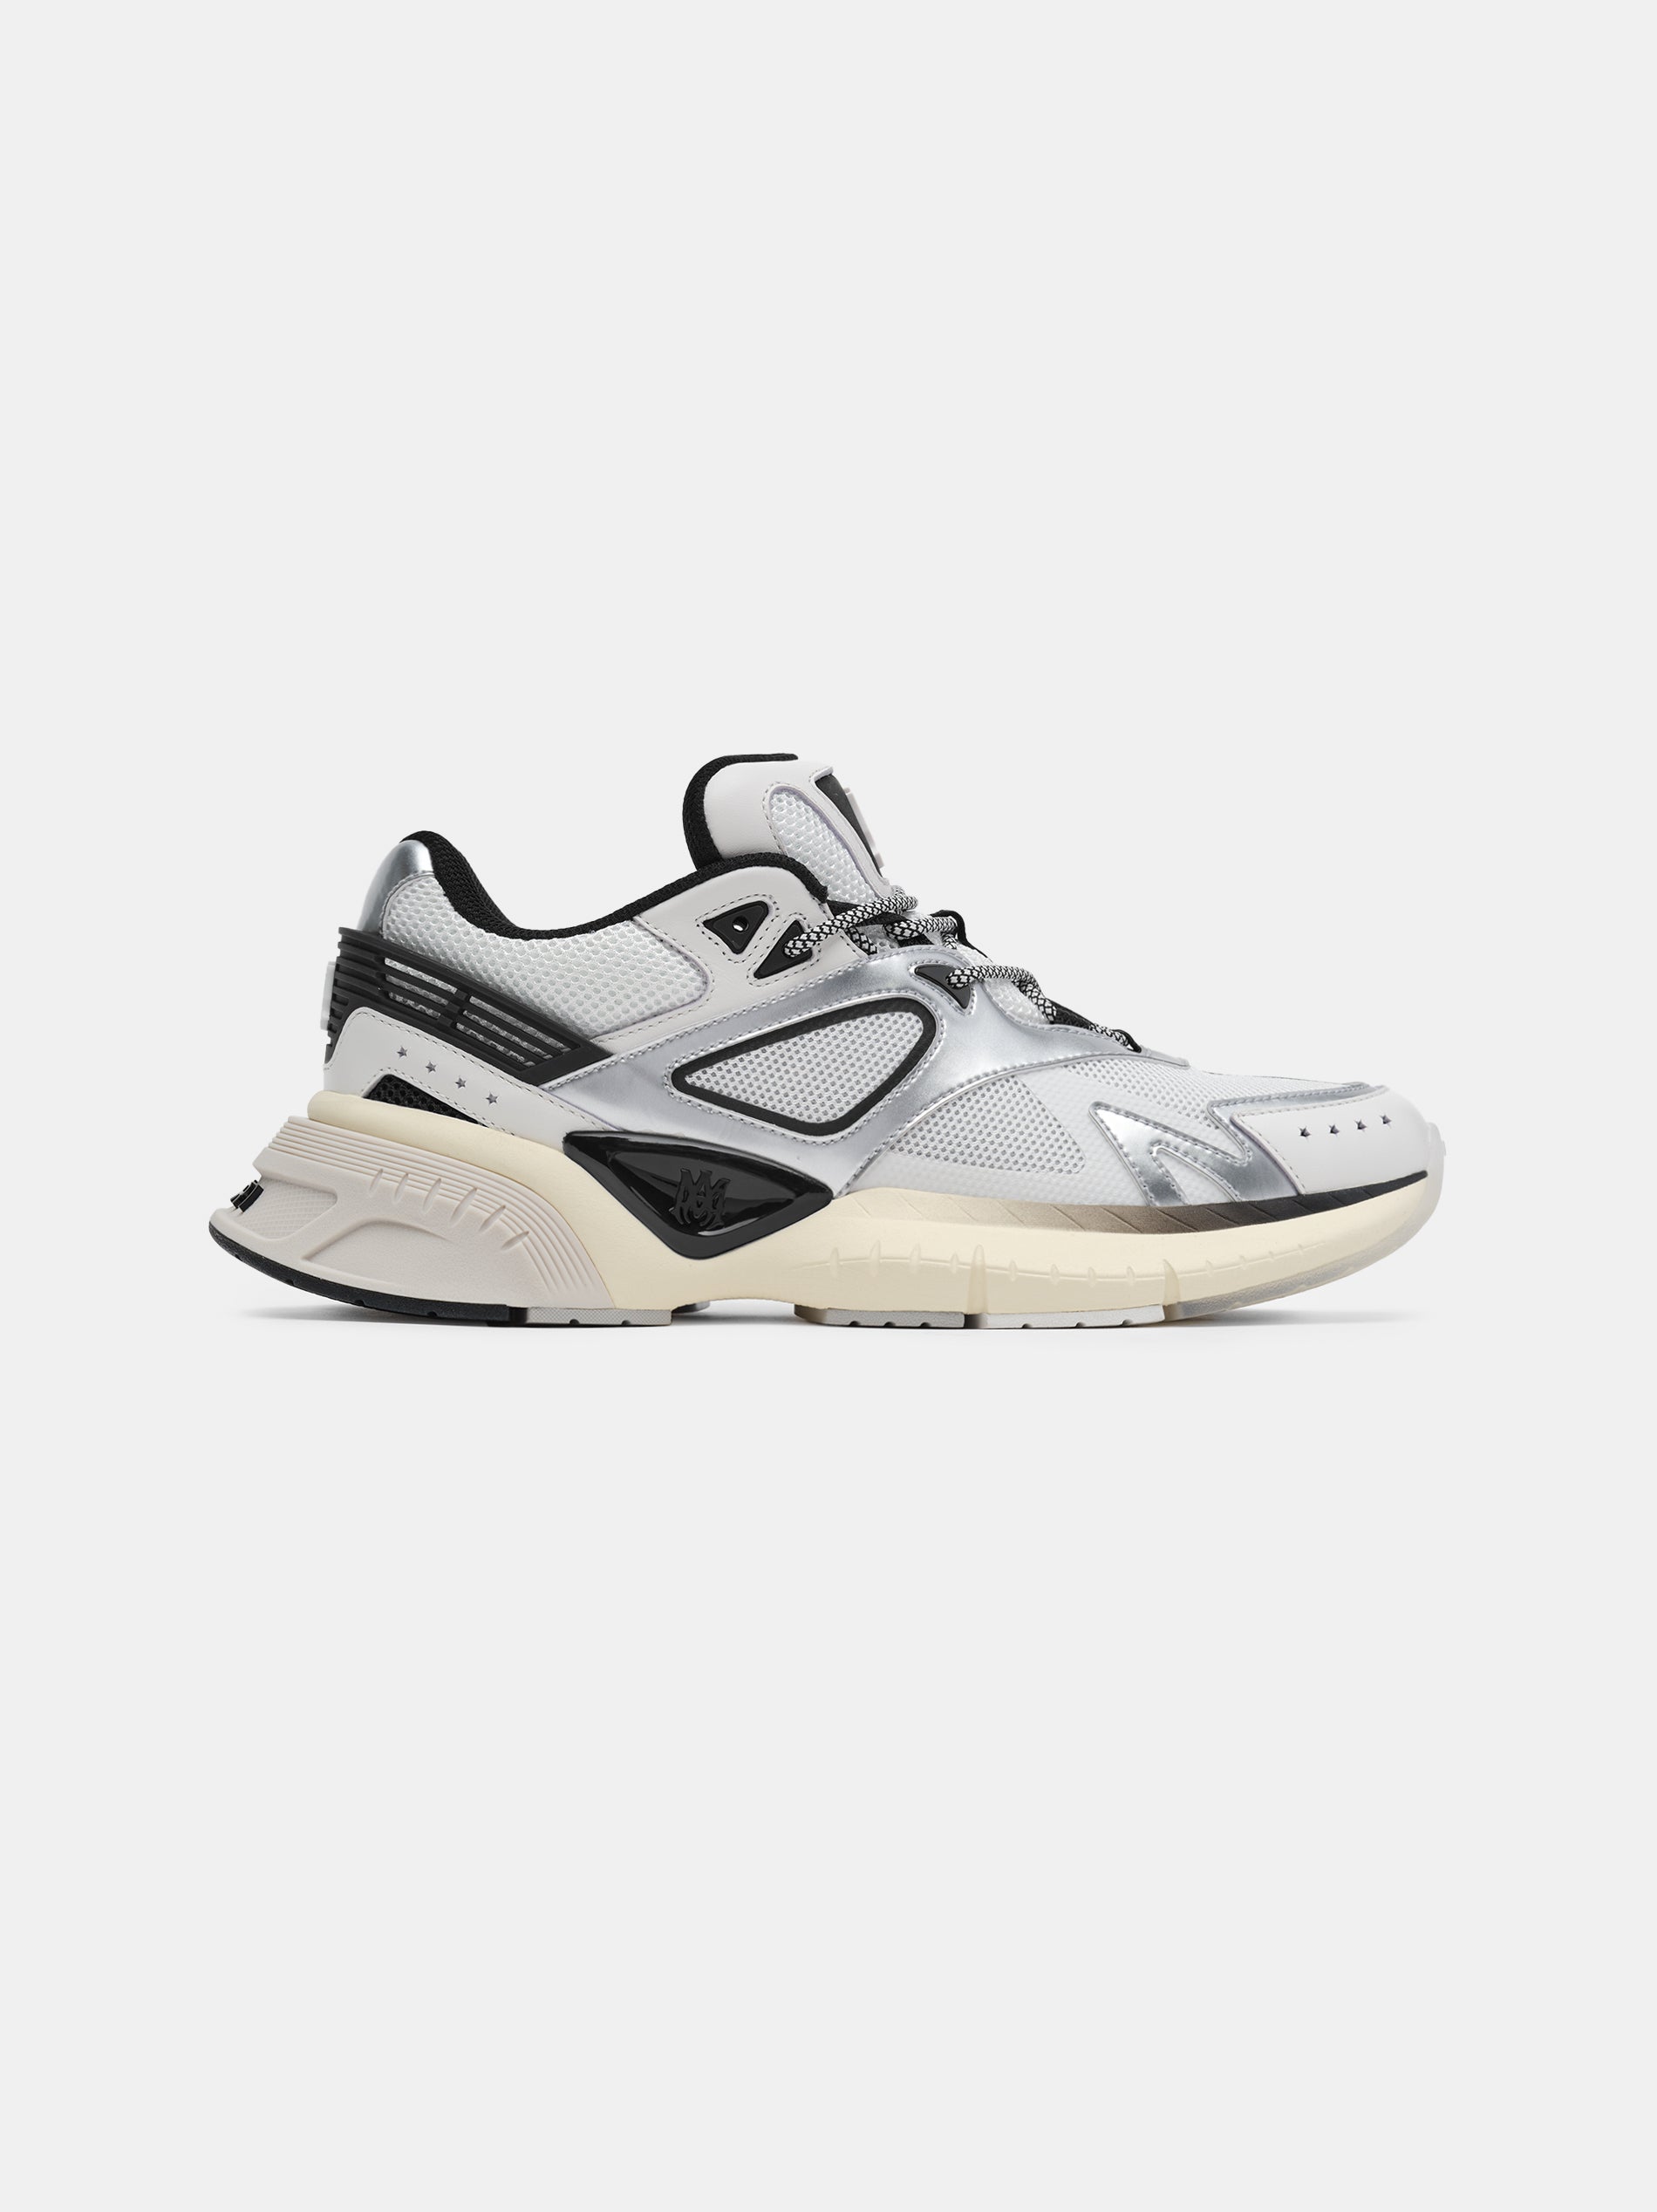 Product MA RUNNER - Black White Silver featured image